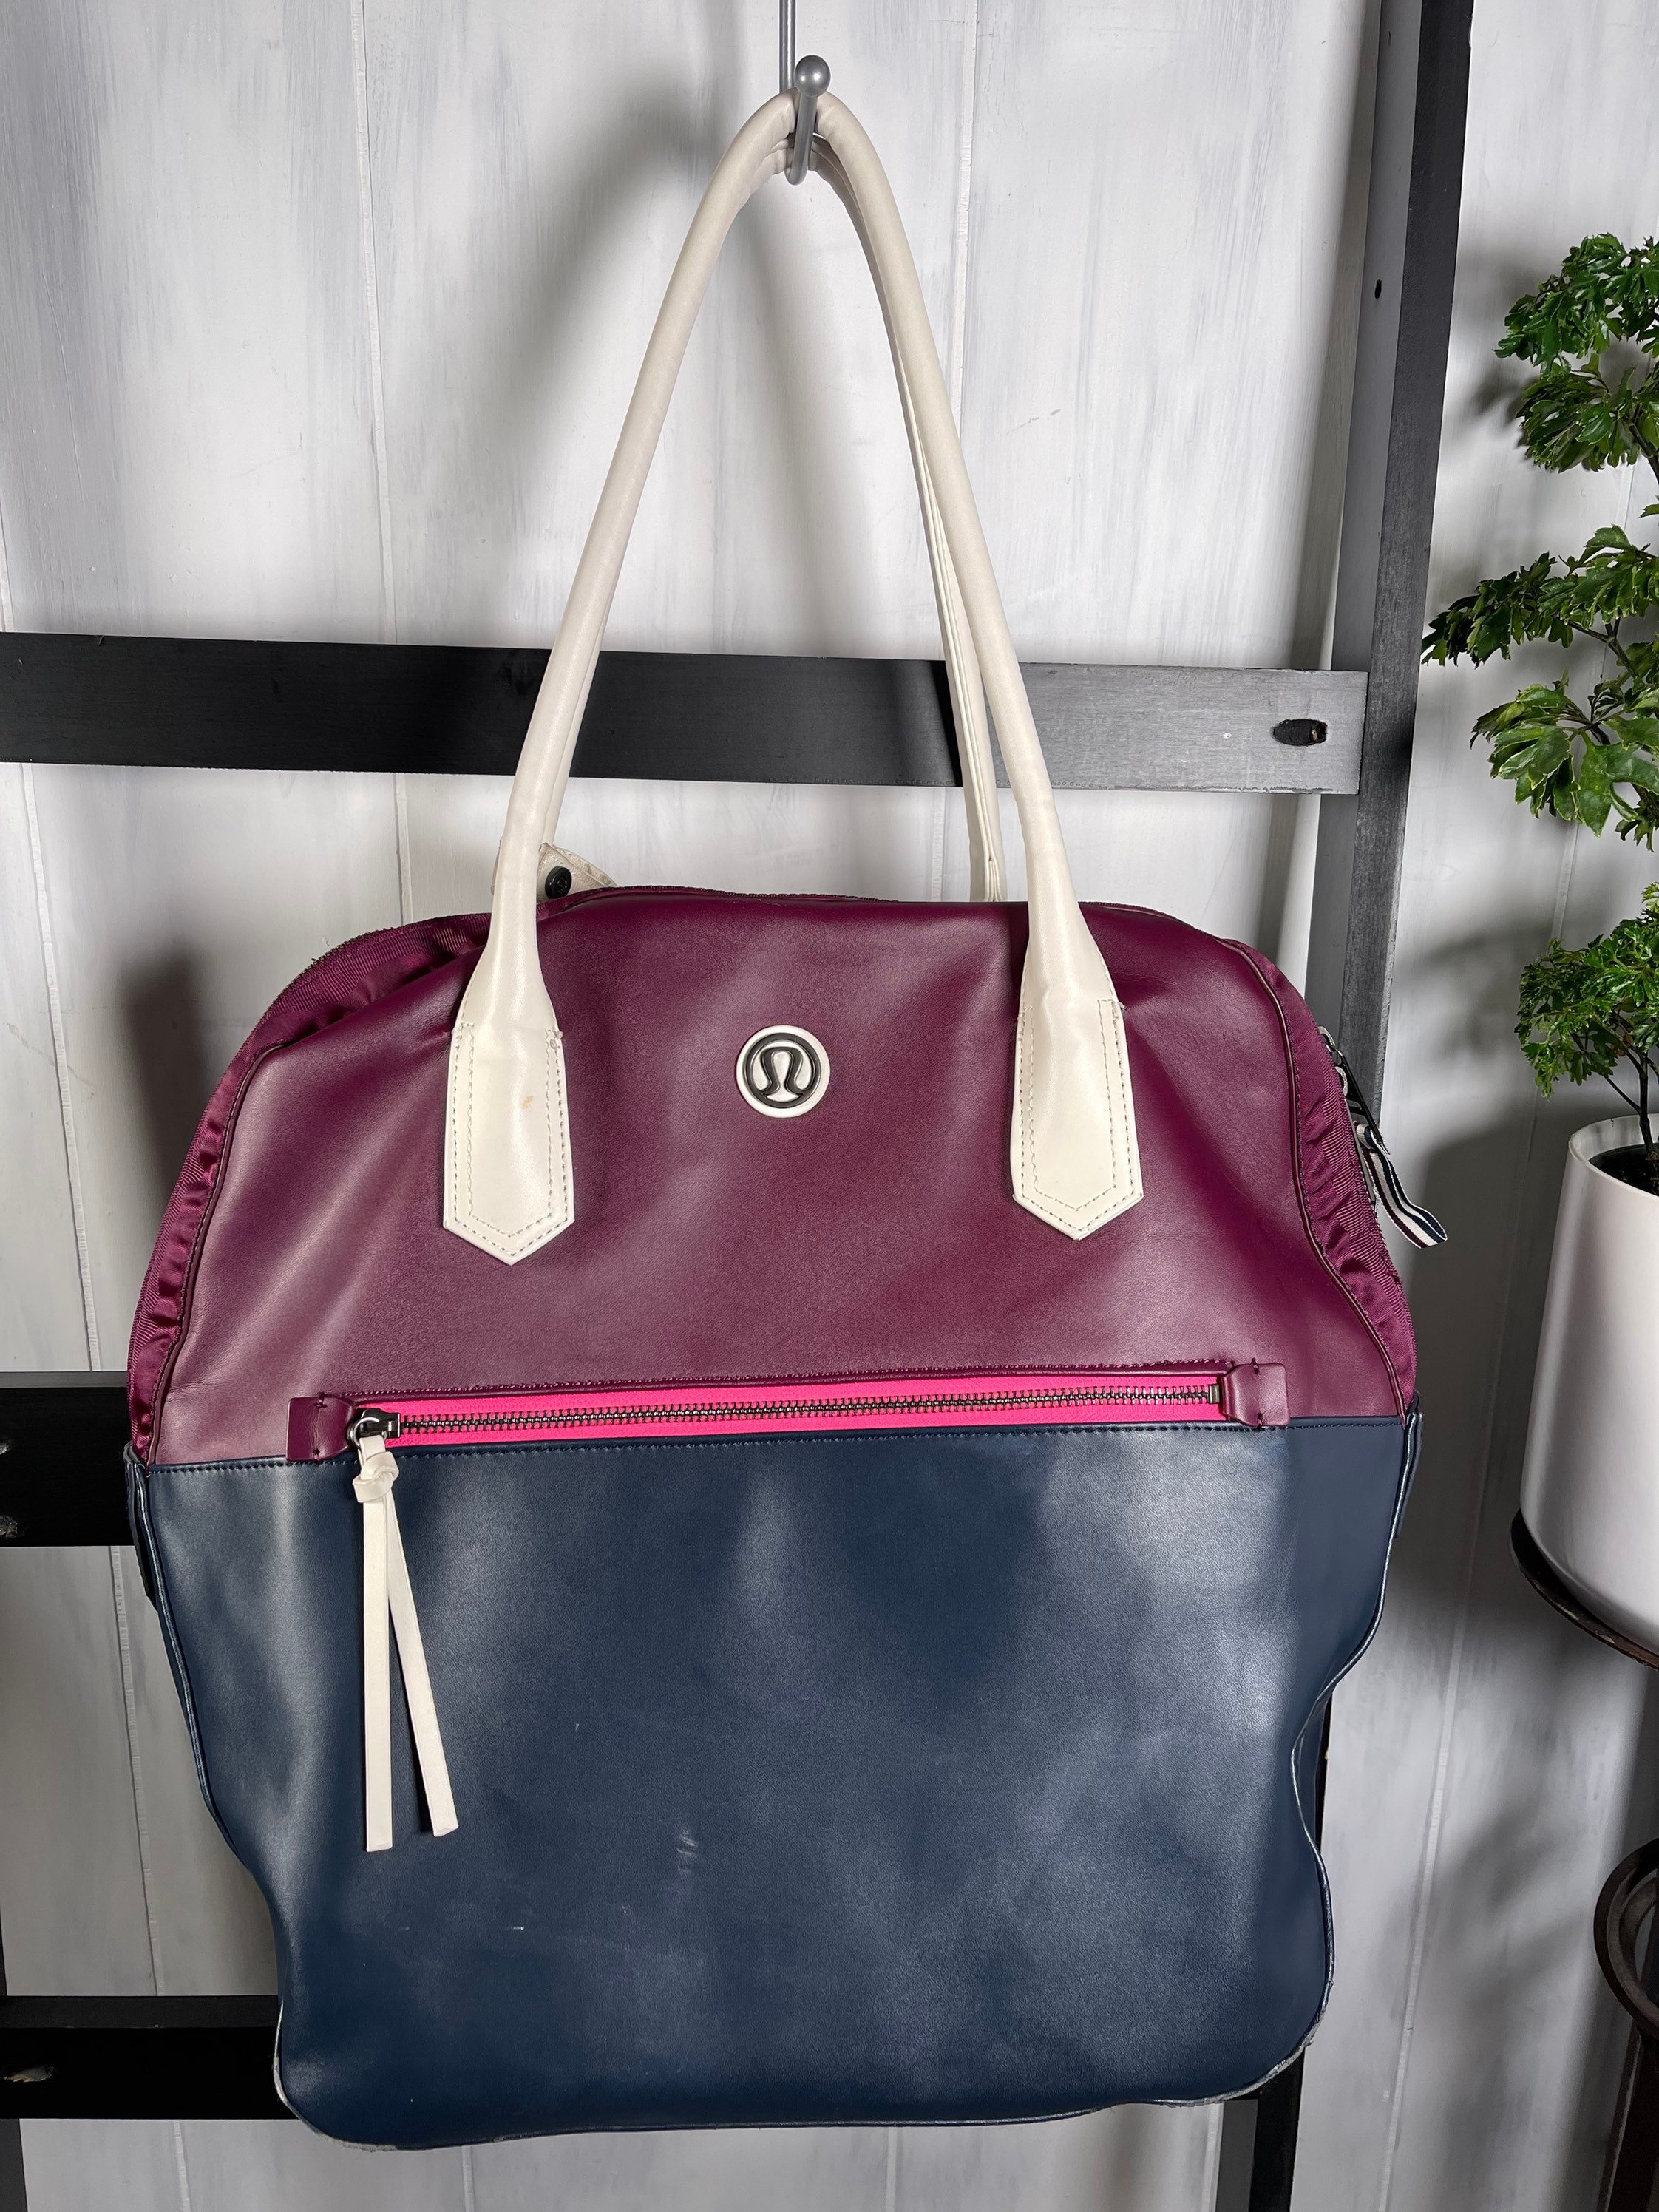 Get the lululemon Everywhere Belt Bag while its back in stock